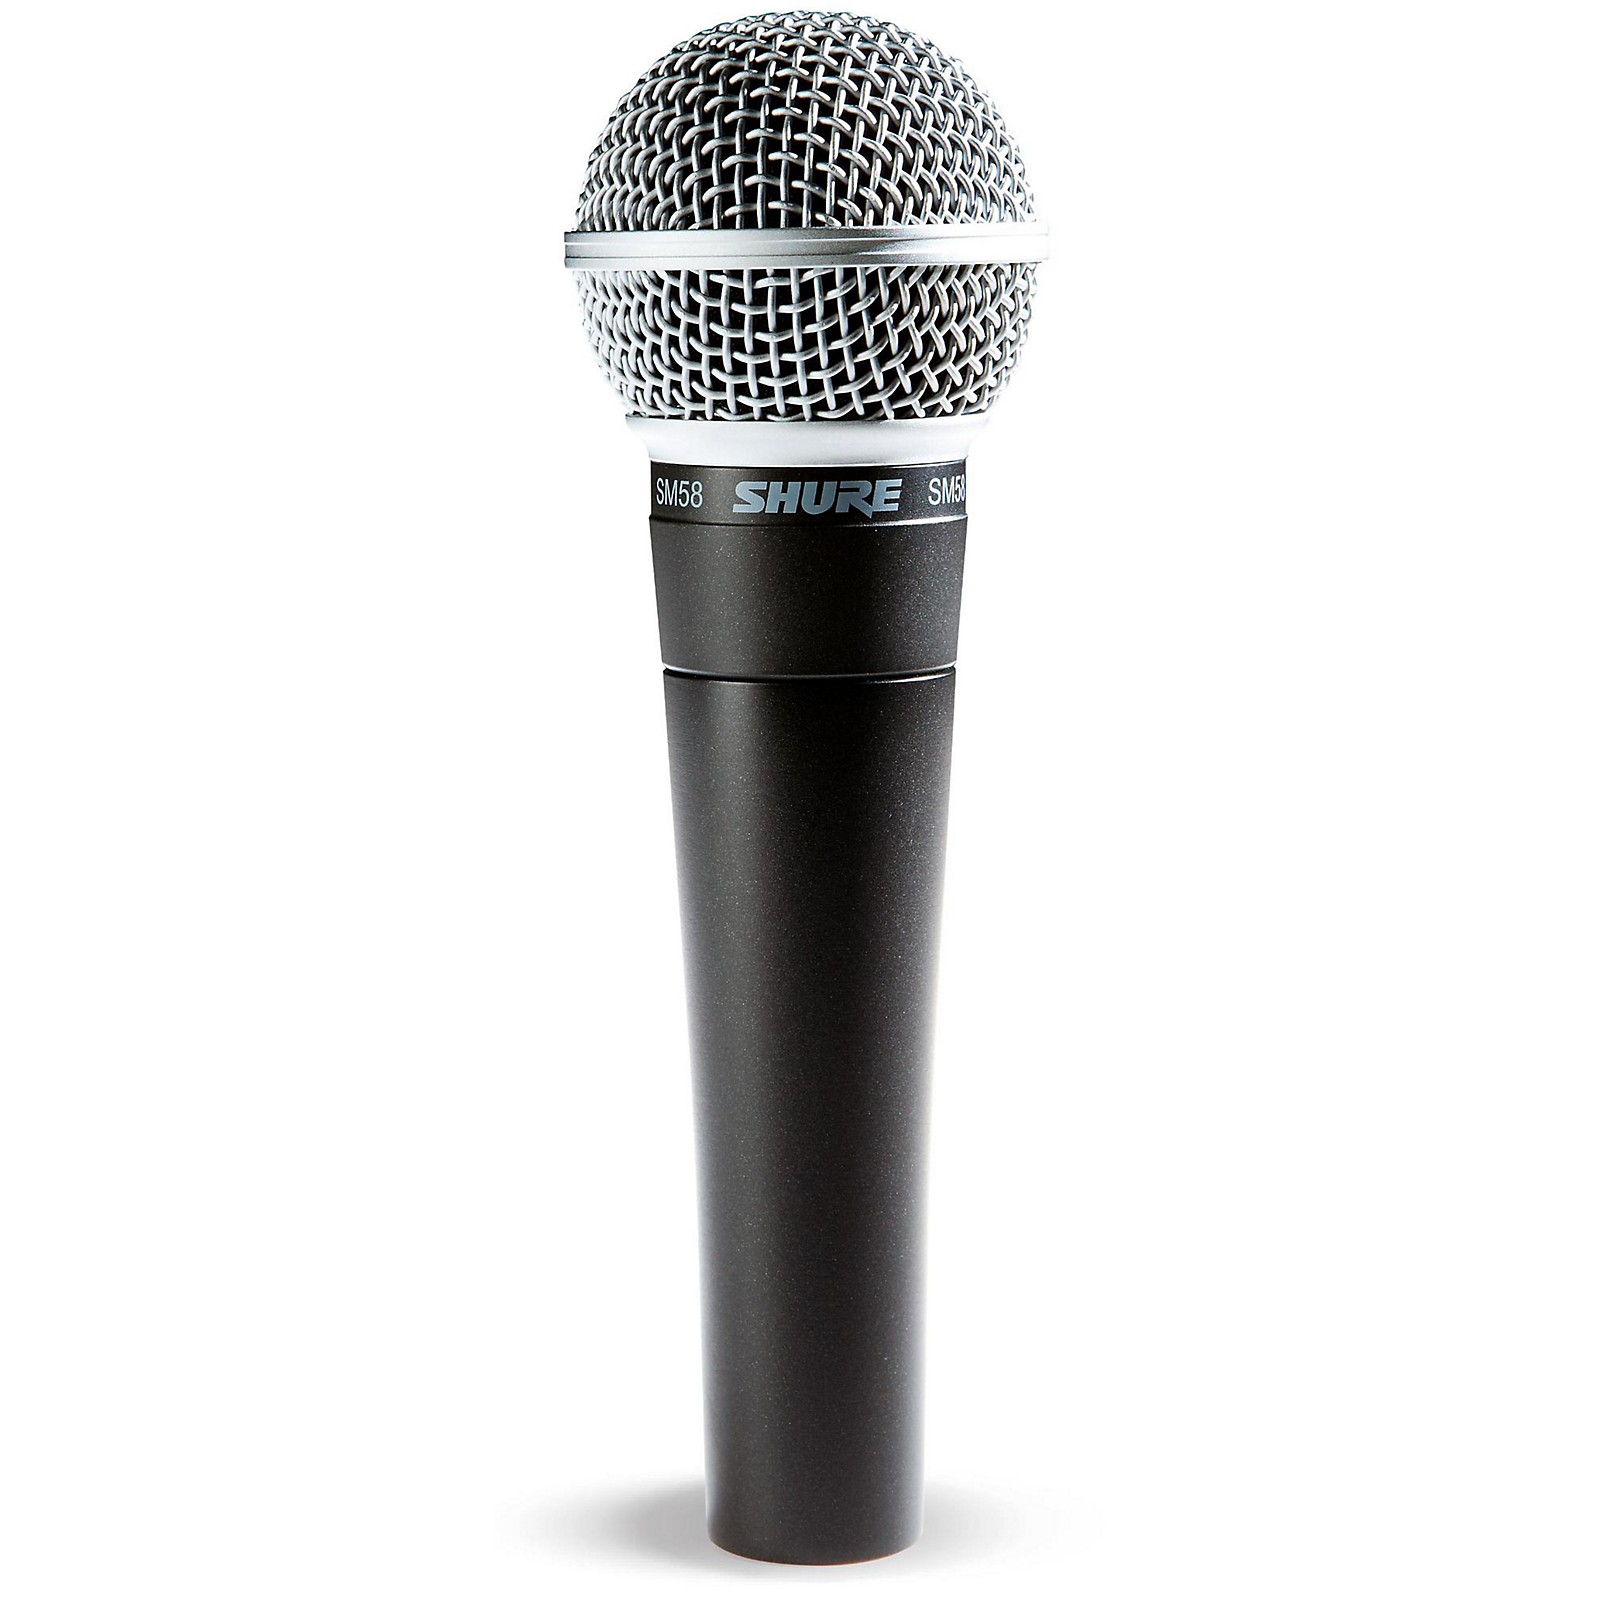 Shure SM58 Dynamic Handheld Vocal Microphone | Guitar Center